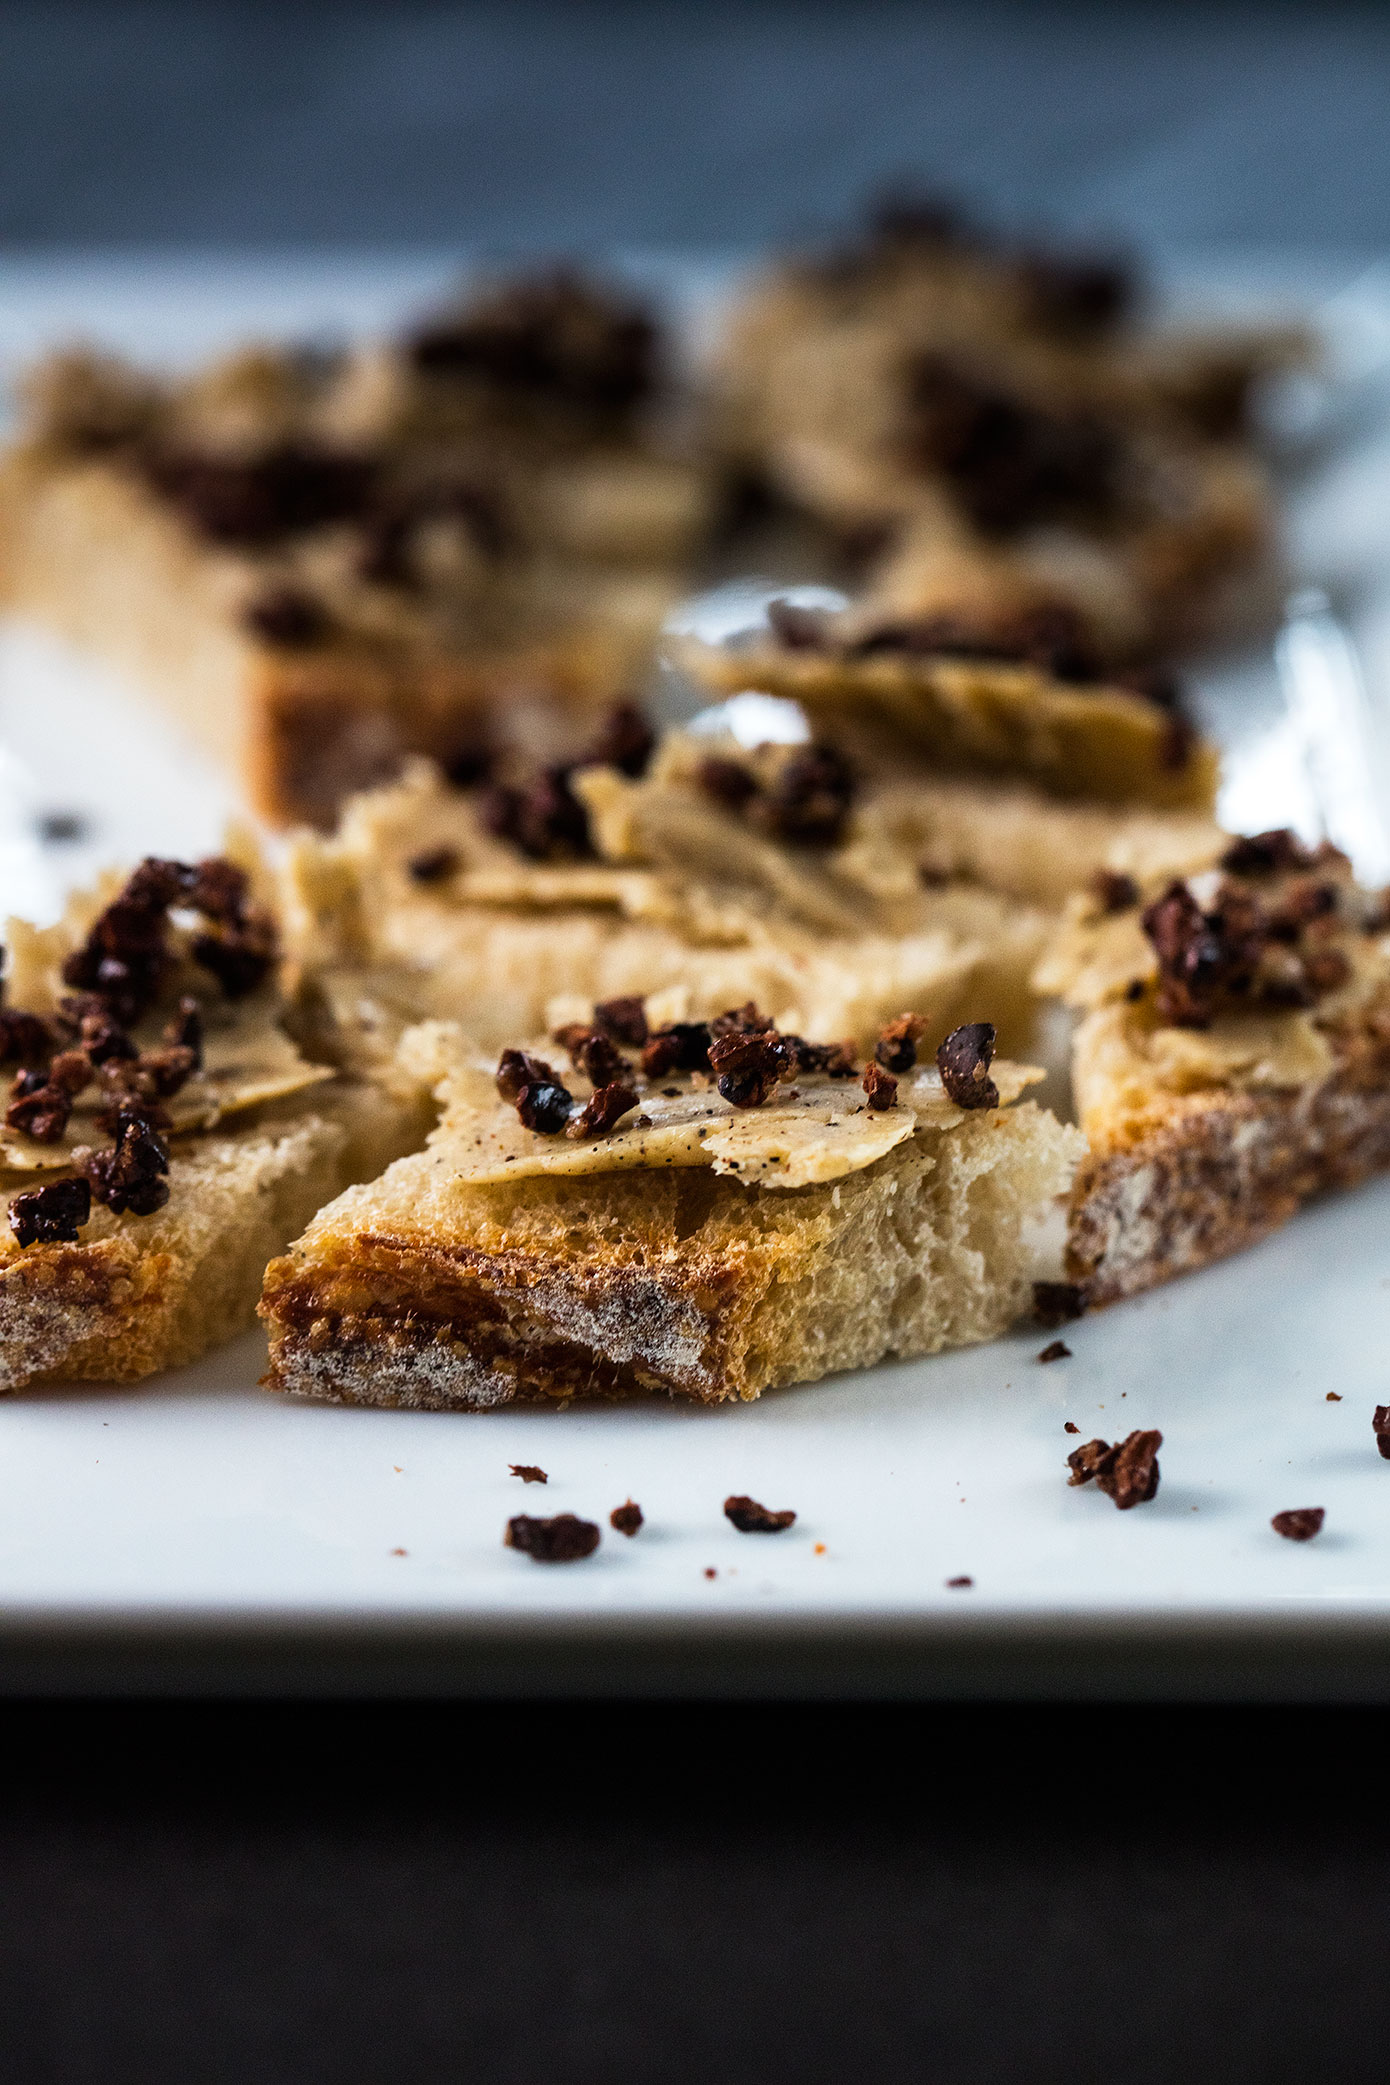 Crunchy bread, Bordier Butter with Madagascar Vanilla and cocoa nibs